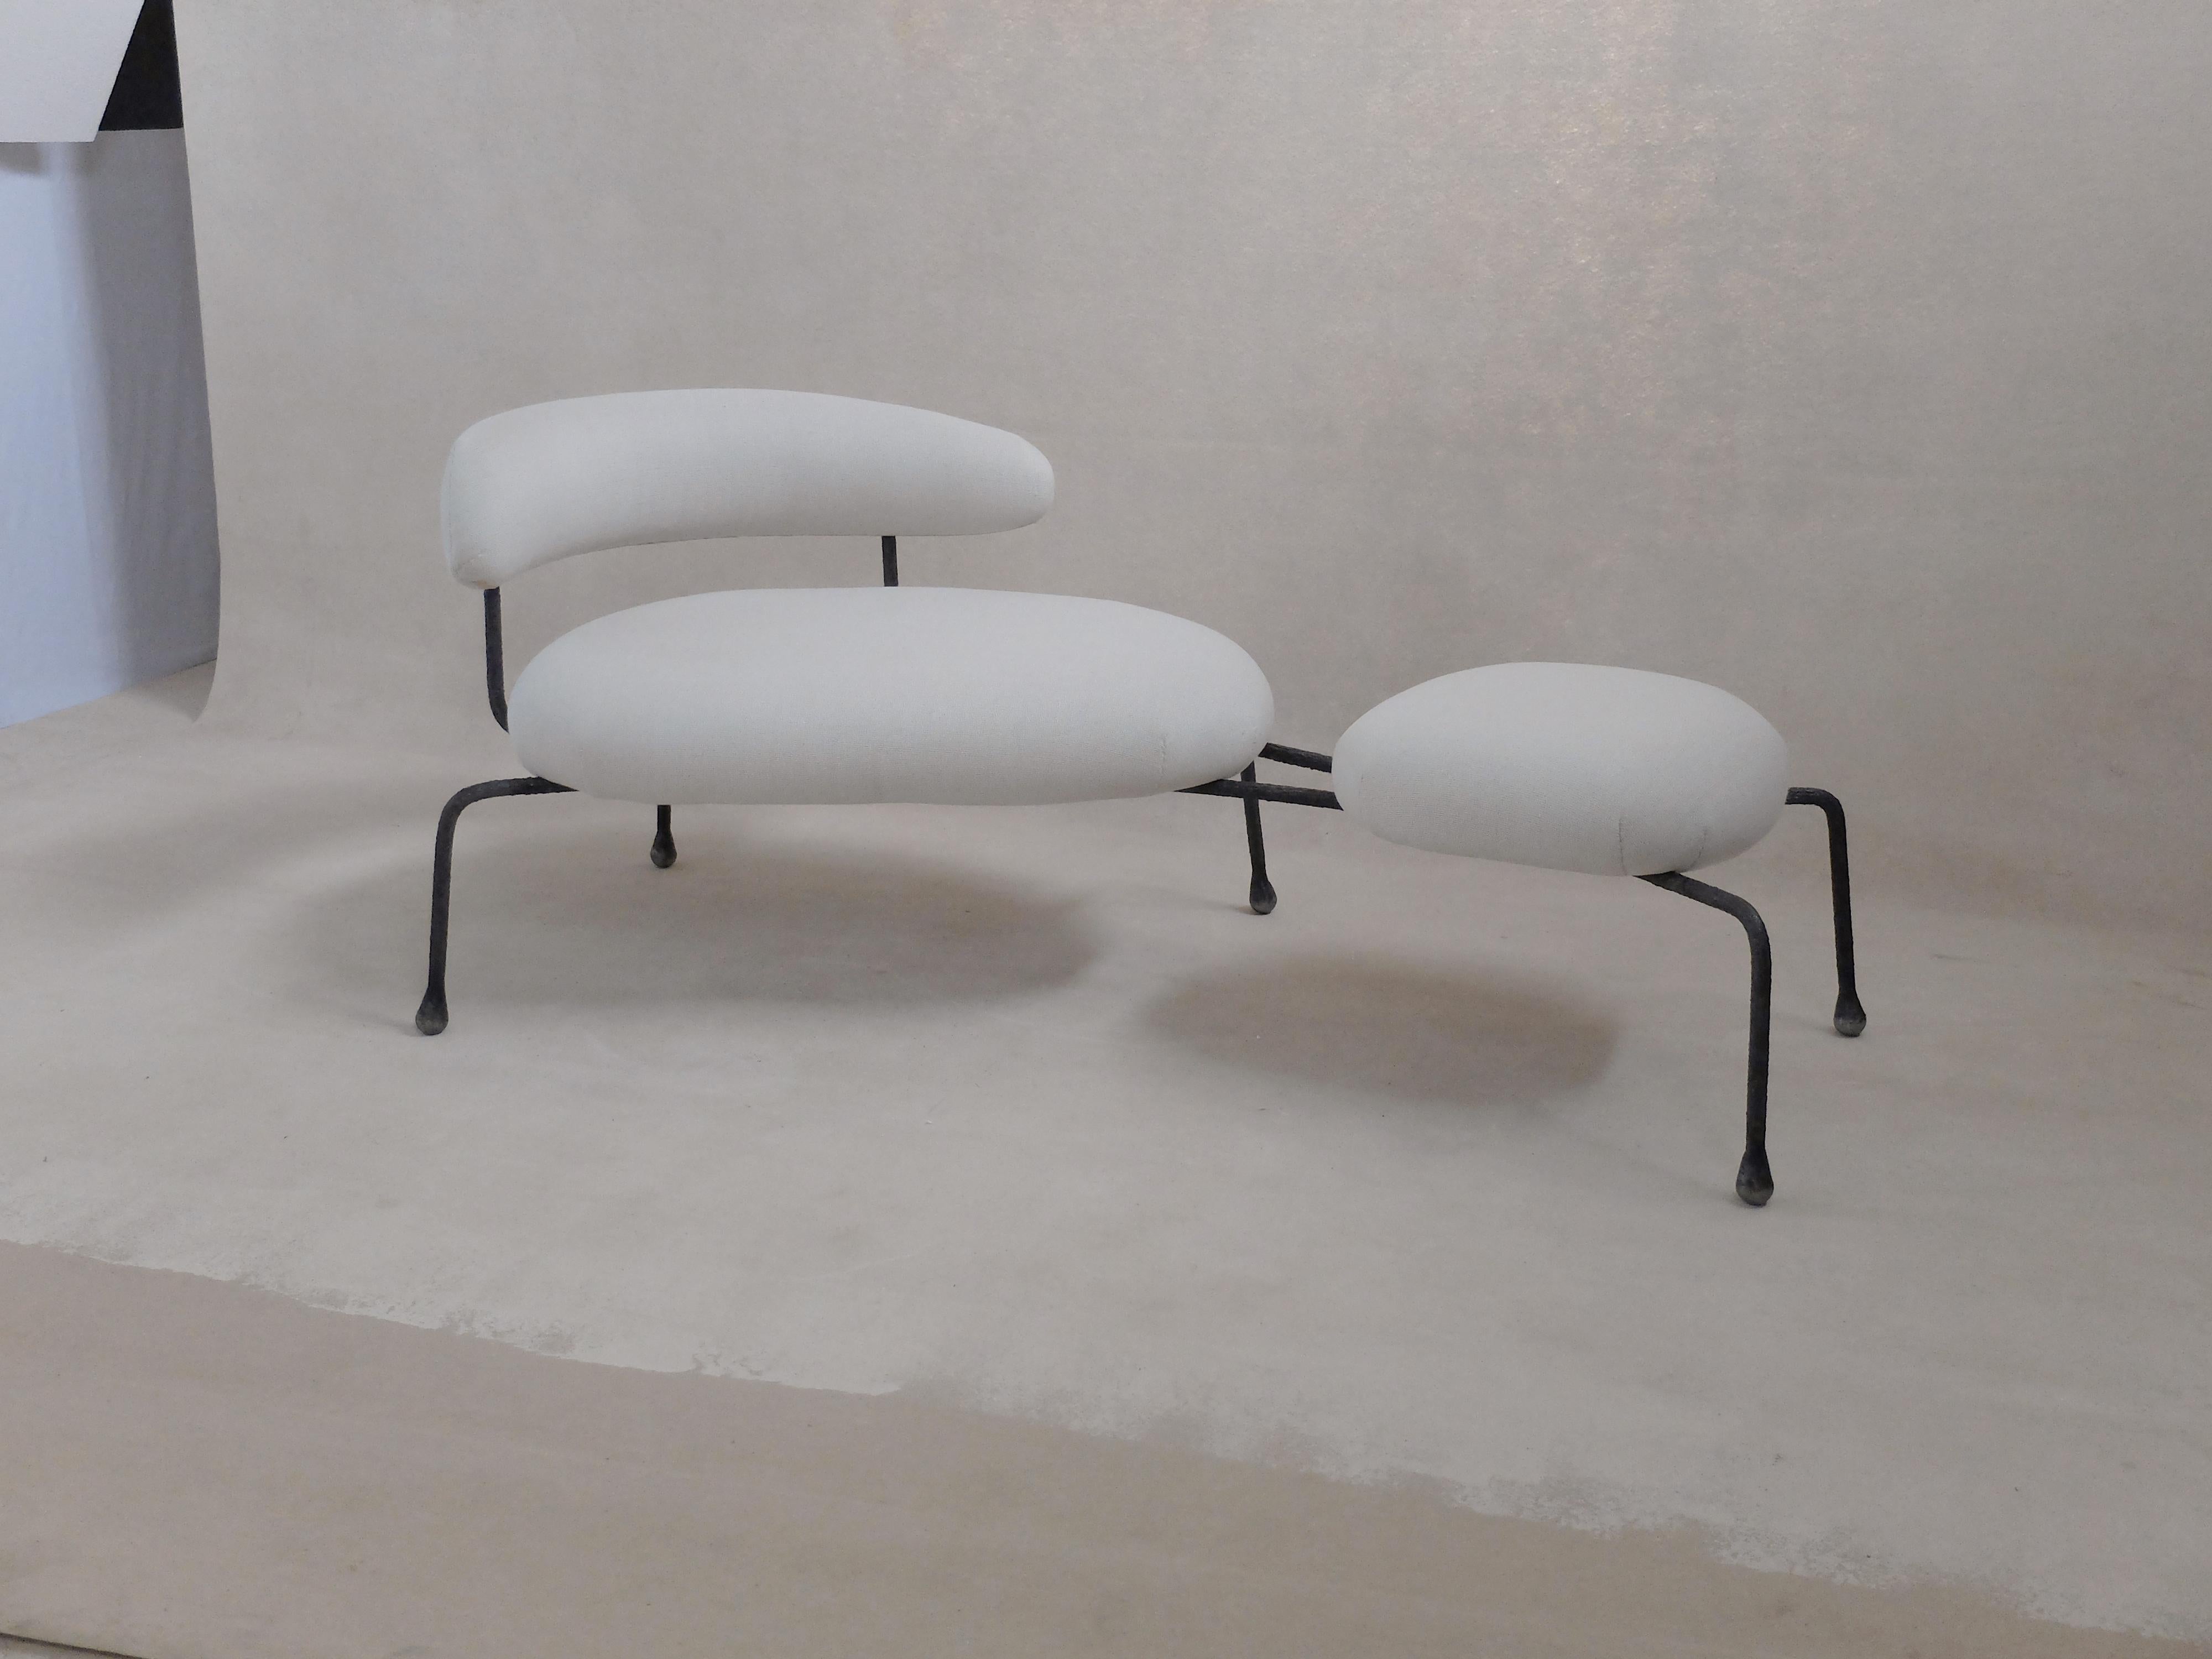 Reveur I Anthracite Seating by Altin
Designed and developed by Yasmine Sfar and Mehdi Kebaier.
Dimensions: D 190 x W 95 x H 78 cm
Materials: Metal, fabric.

Meridian in metal structure and textile covering.

Orbit
A journey to a new dream world that